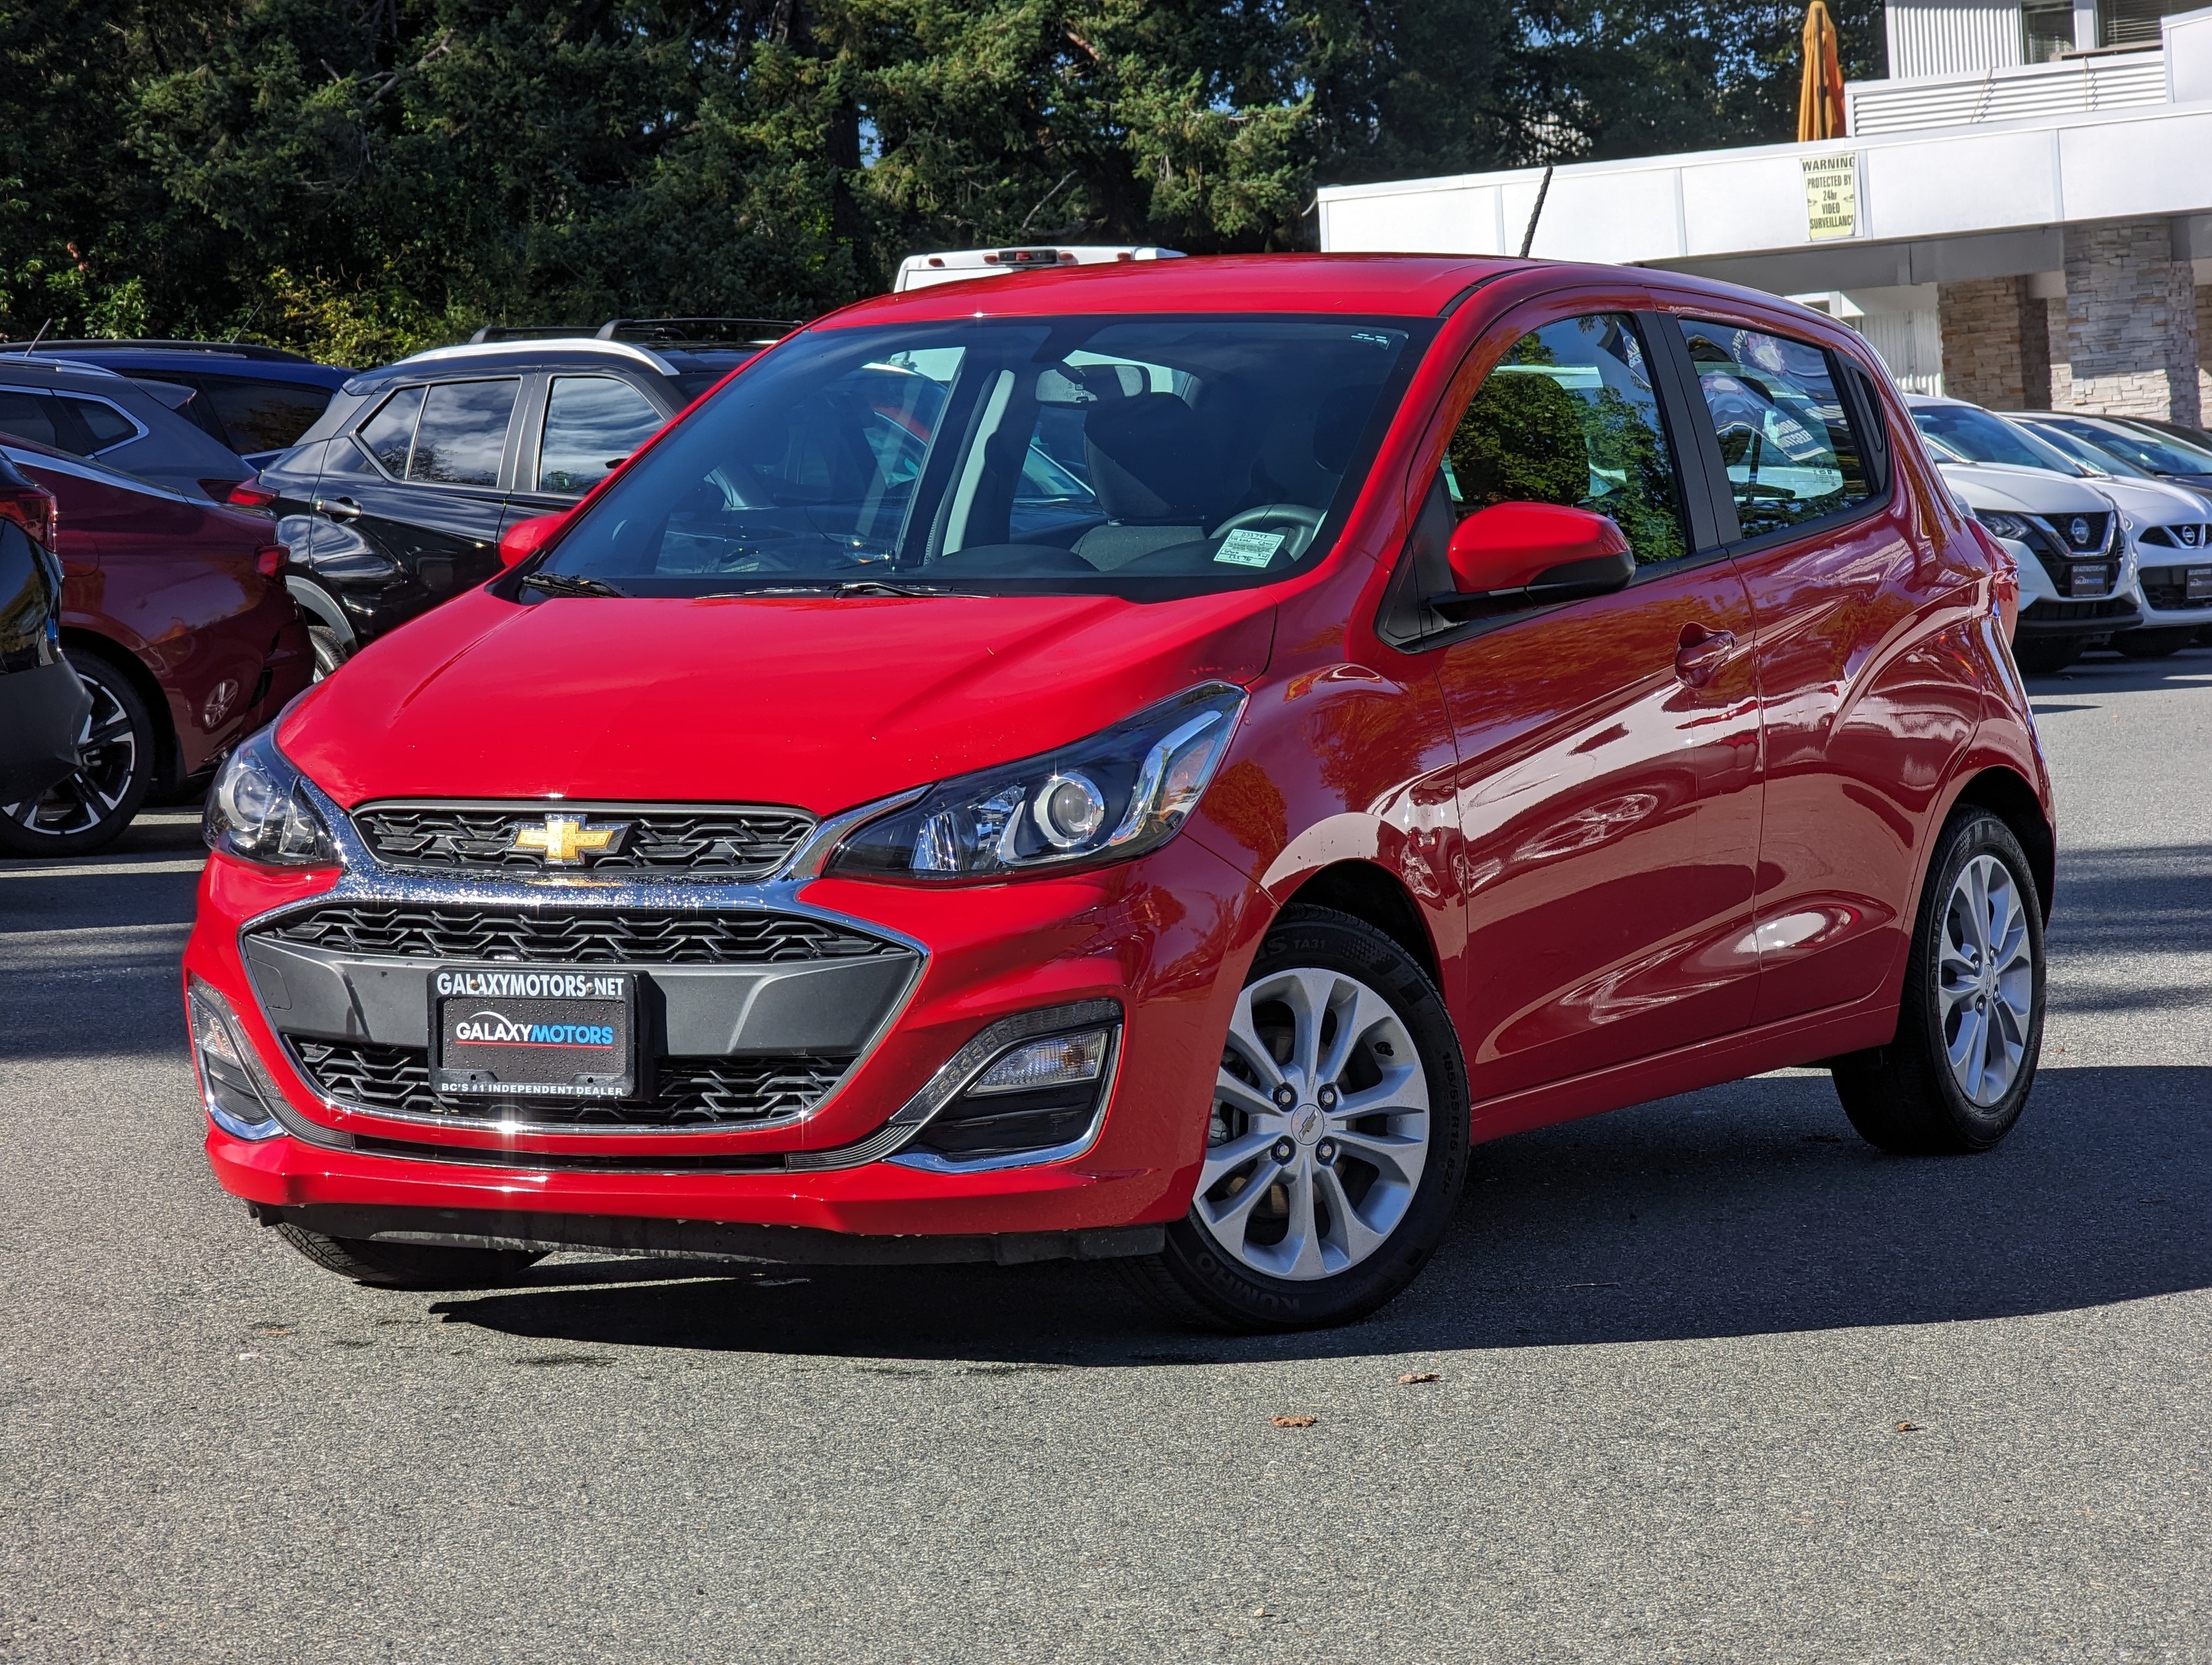 2021 Chevrolet Spark 1LT - No Accidents, Apple CarPlay, Android Auto